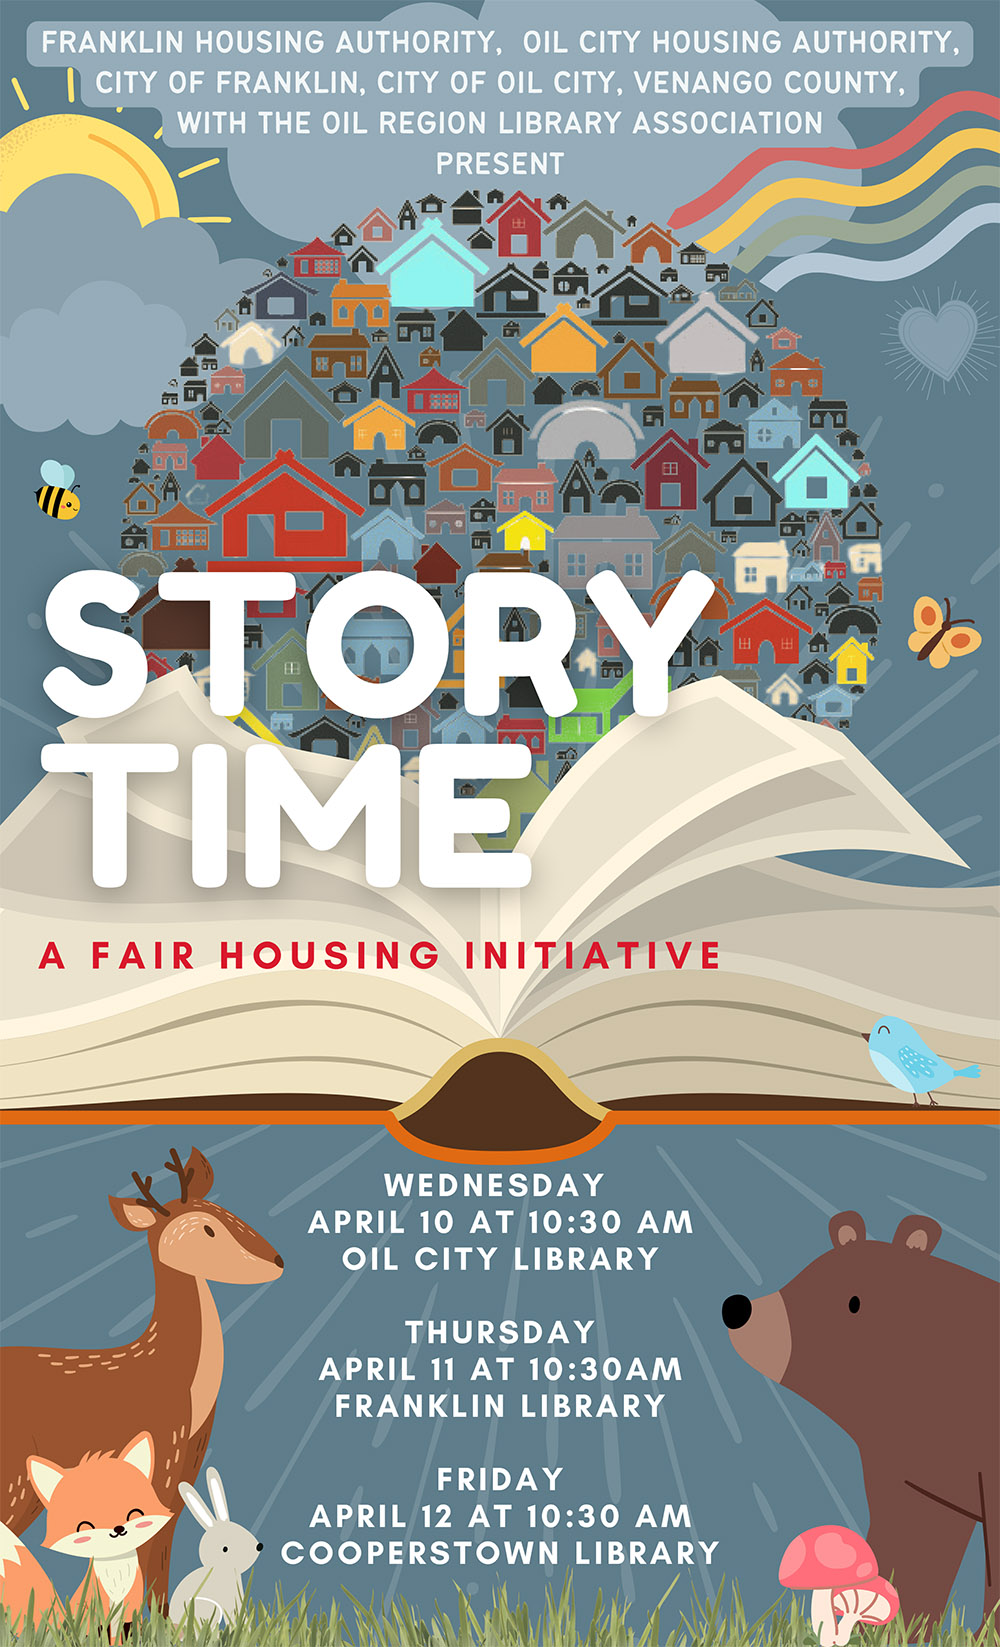 Story Time - A Fair Housing Initiative with Dates, Times and Locations